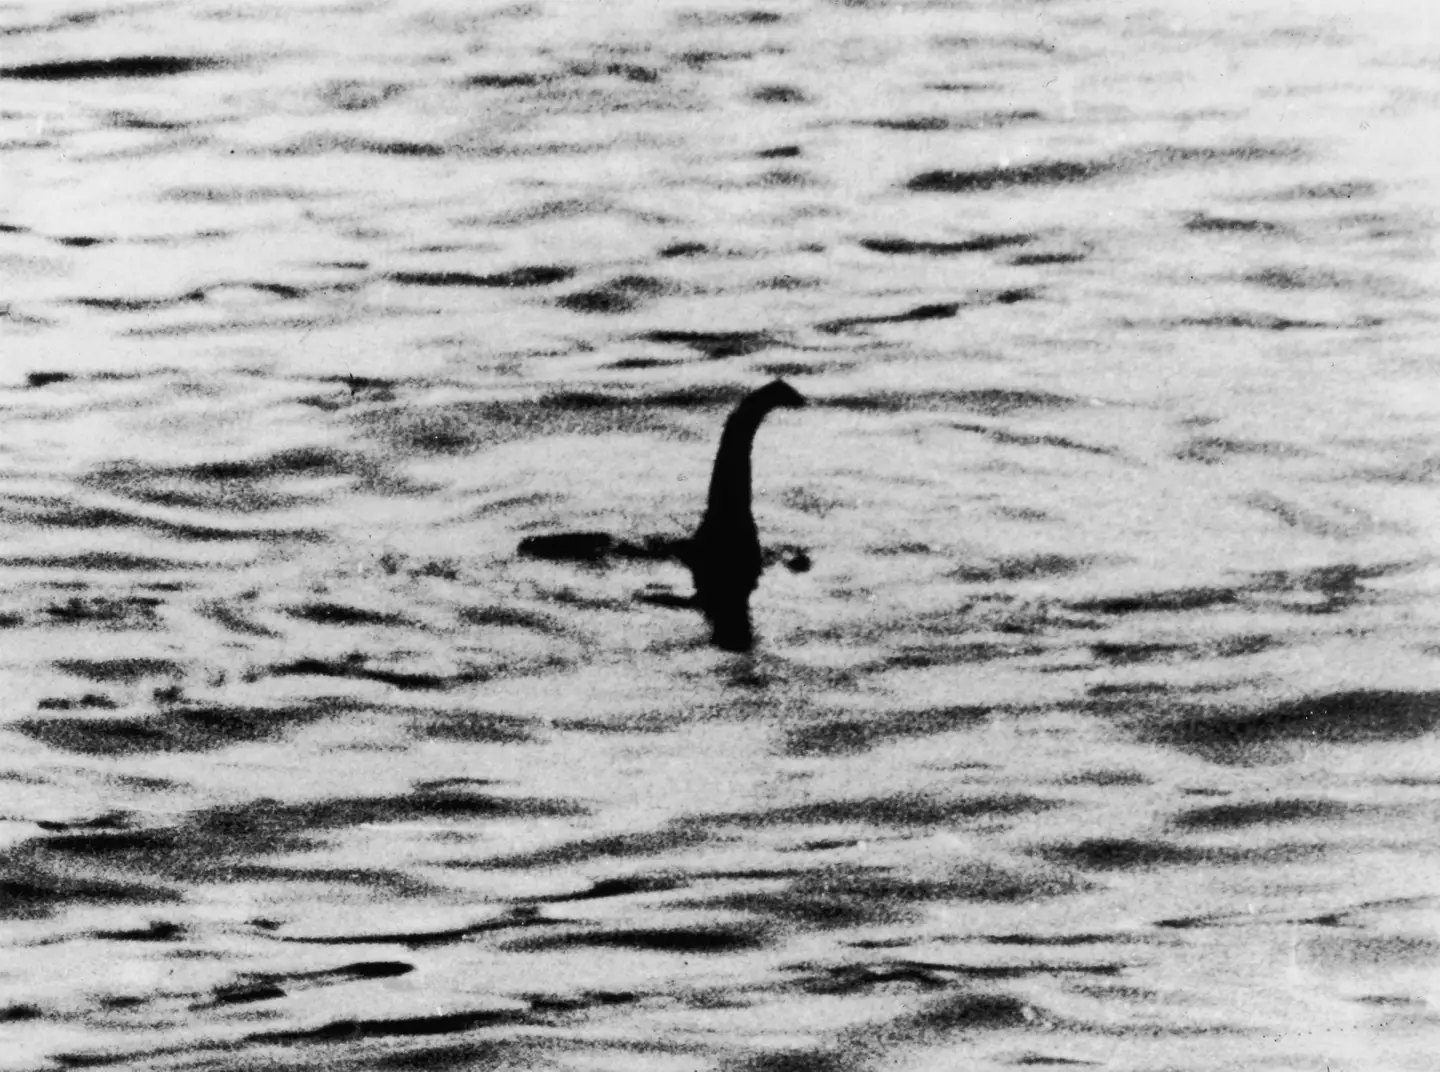 The famous 1934 photo of Nessie was later revealed as a hoax.